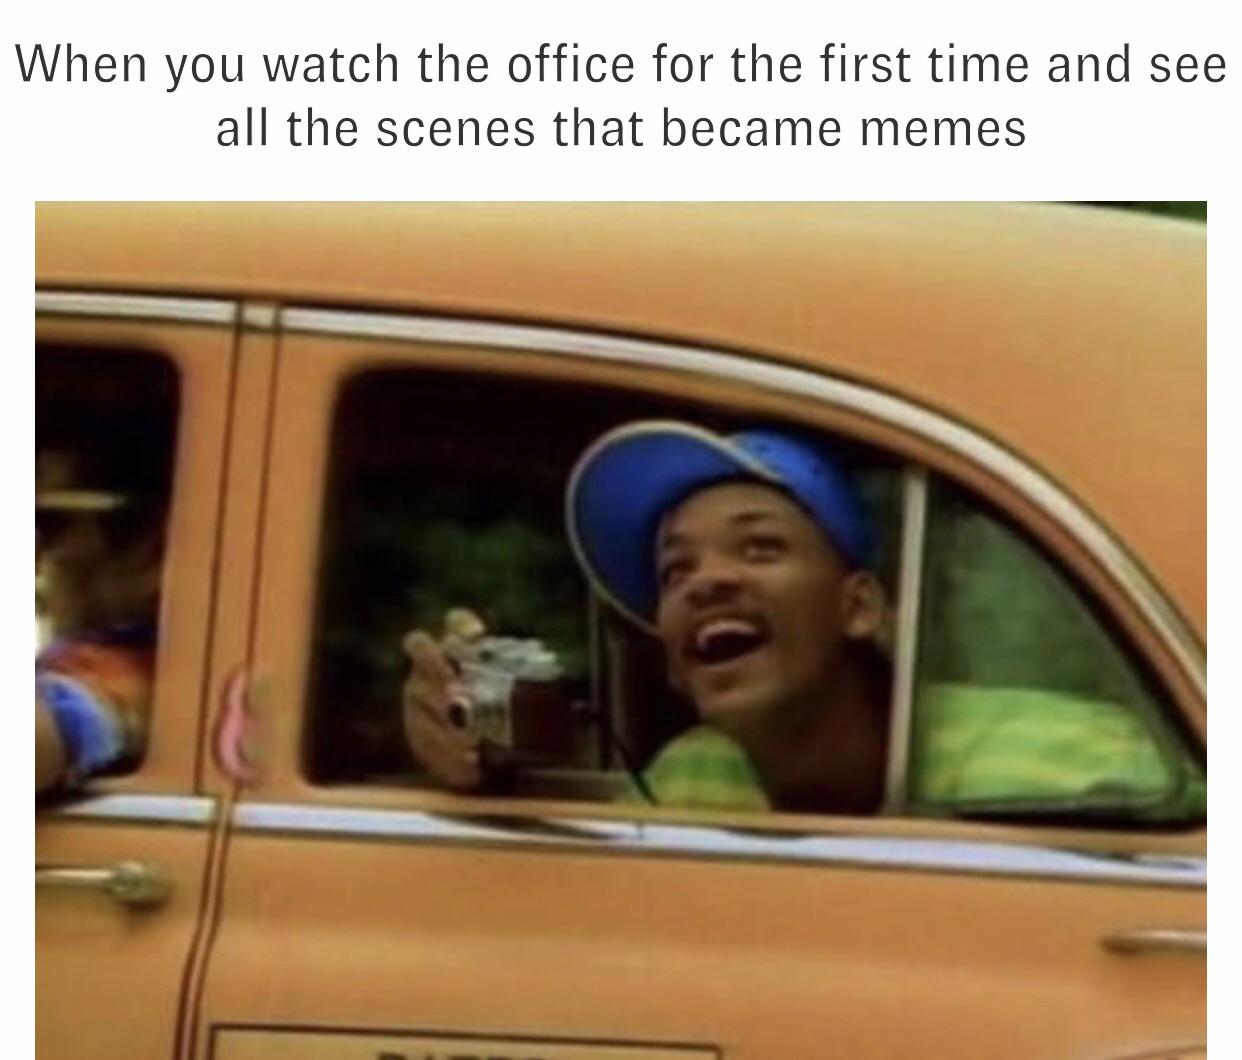 the office memes - jcb meme - When you watch the office for the first time and see all the scenes that became memes